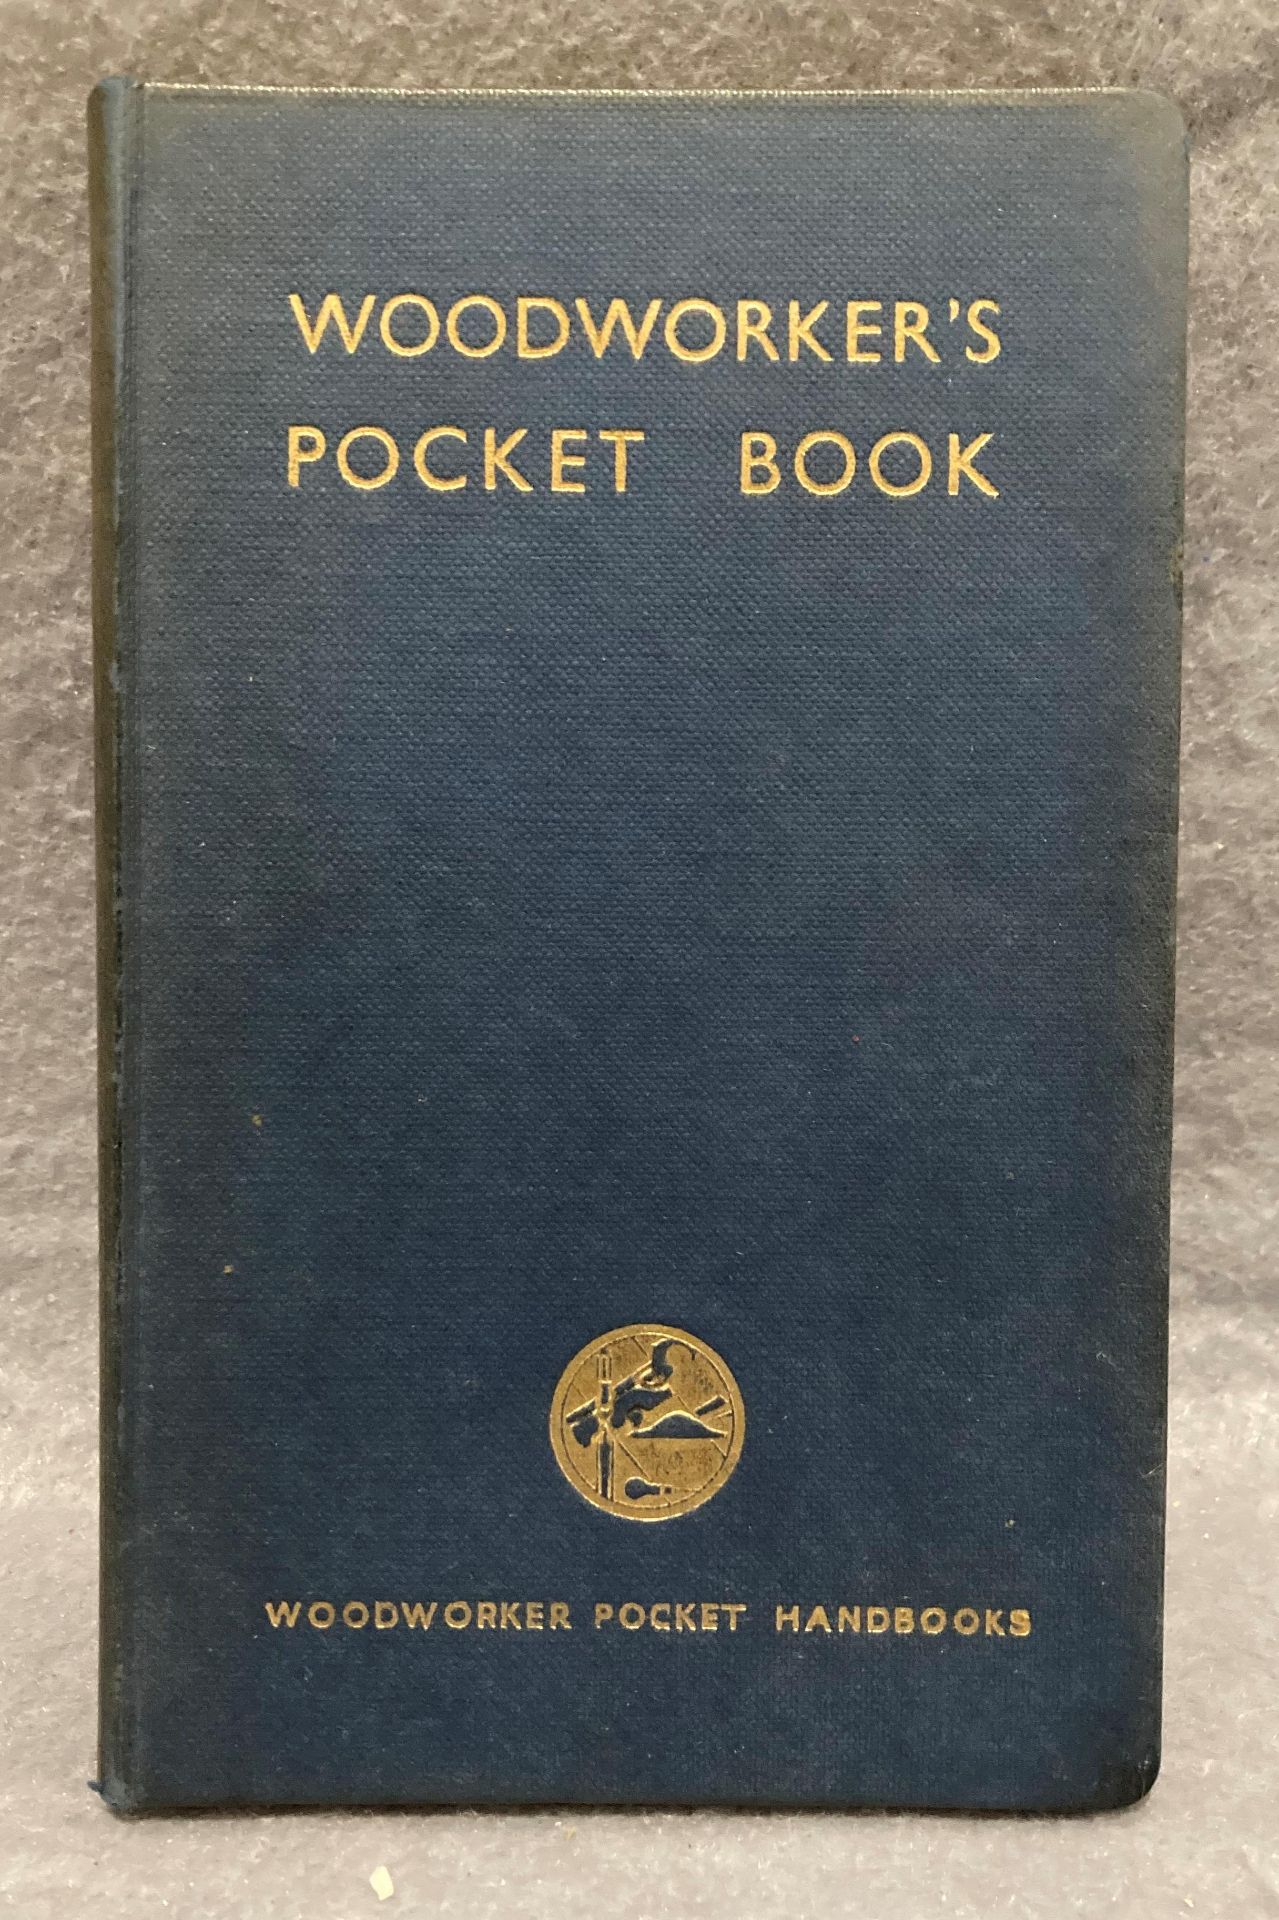 Charles H Hayward 'the Woodworker's Pocket Book, first edition,